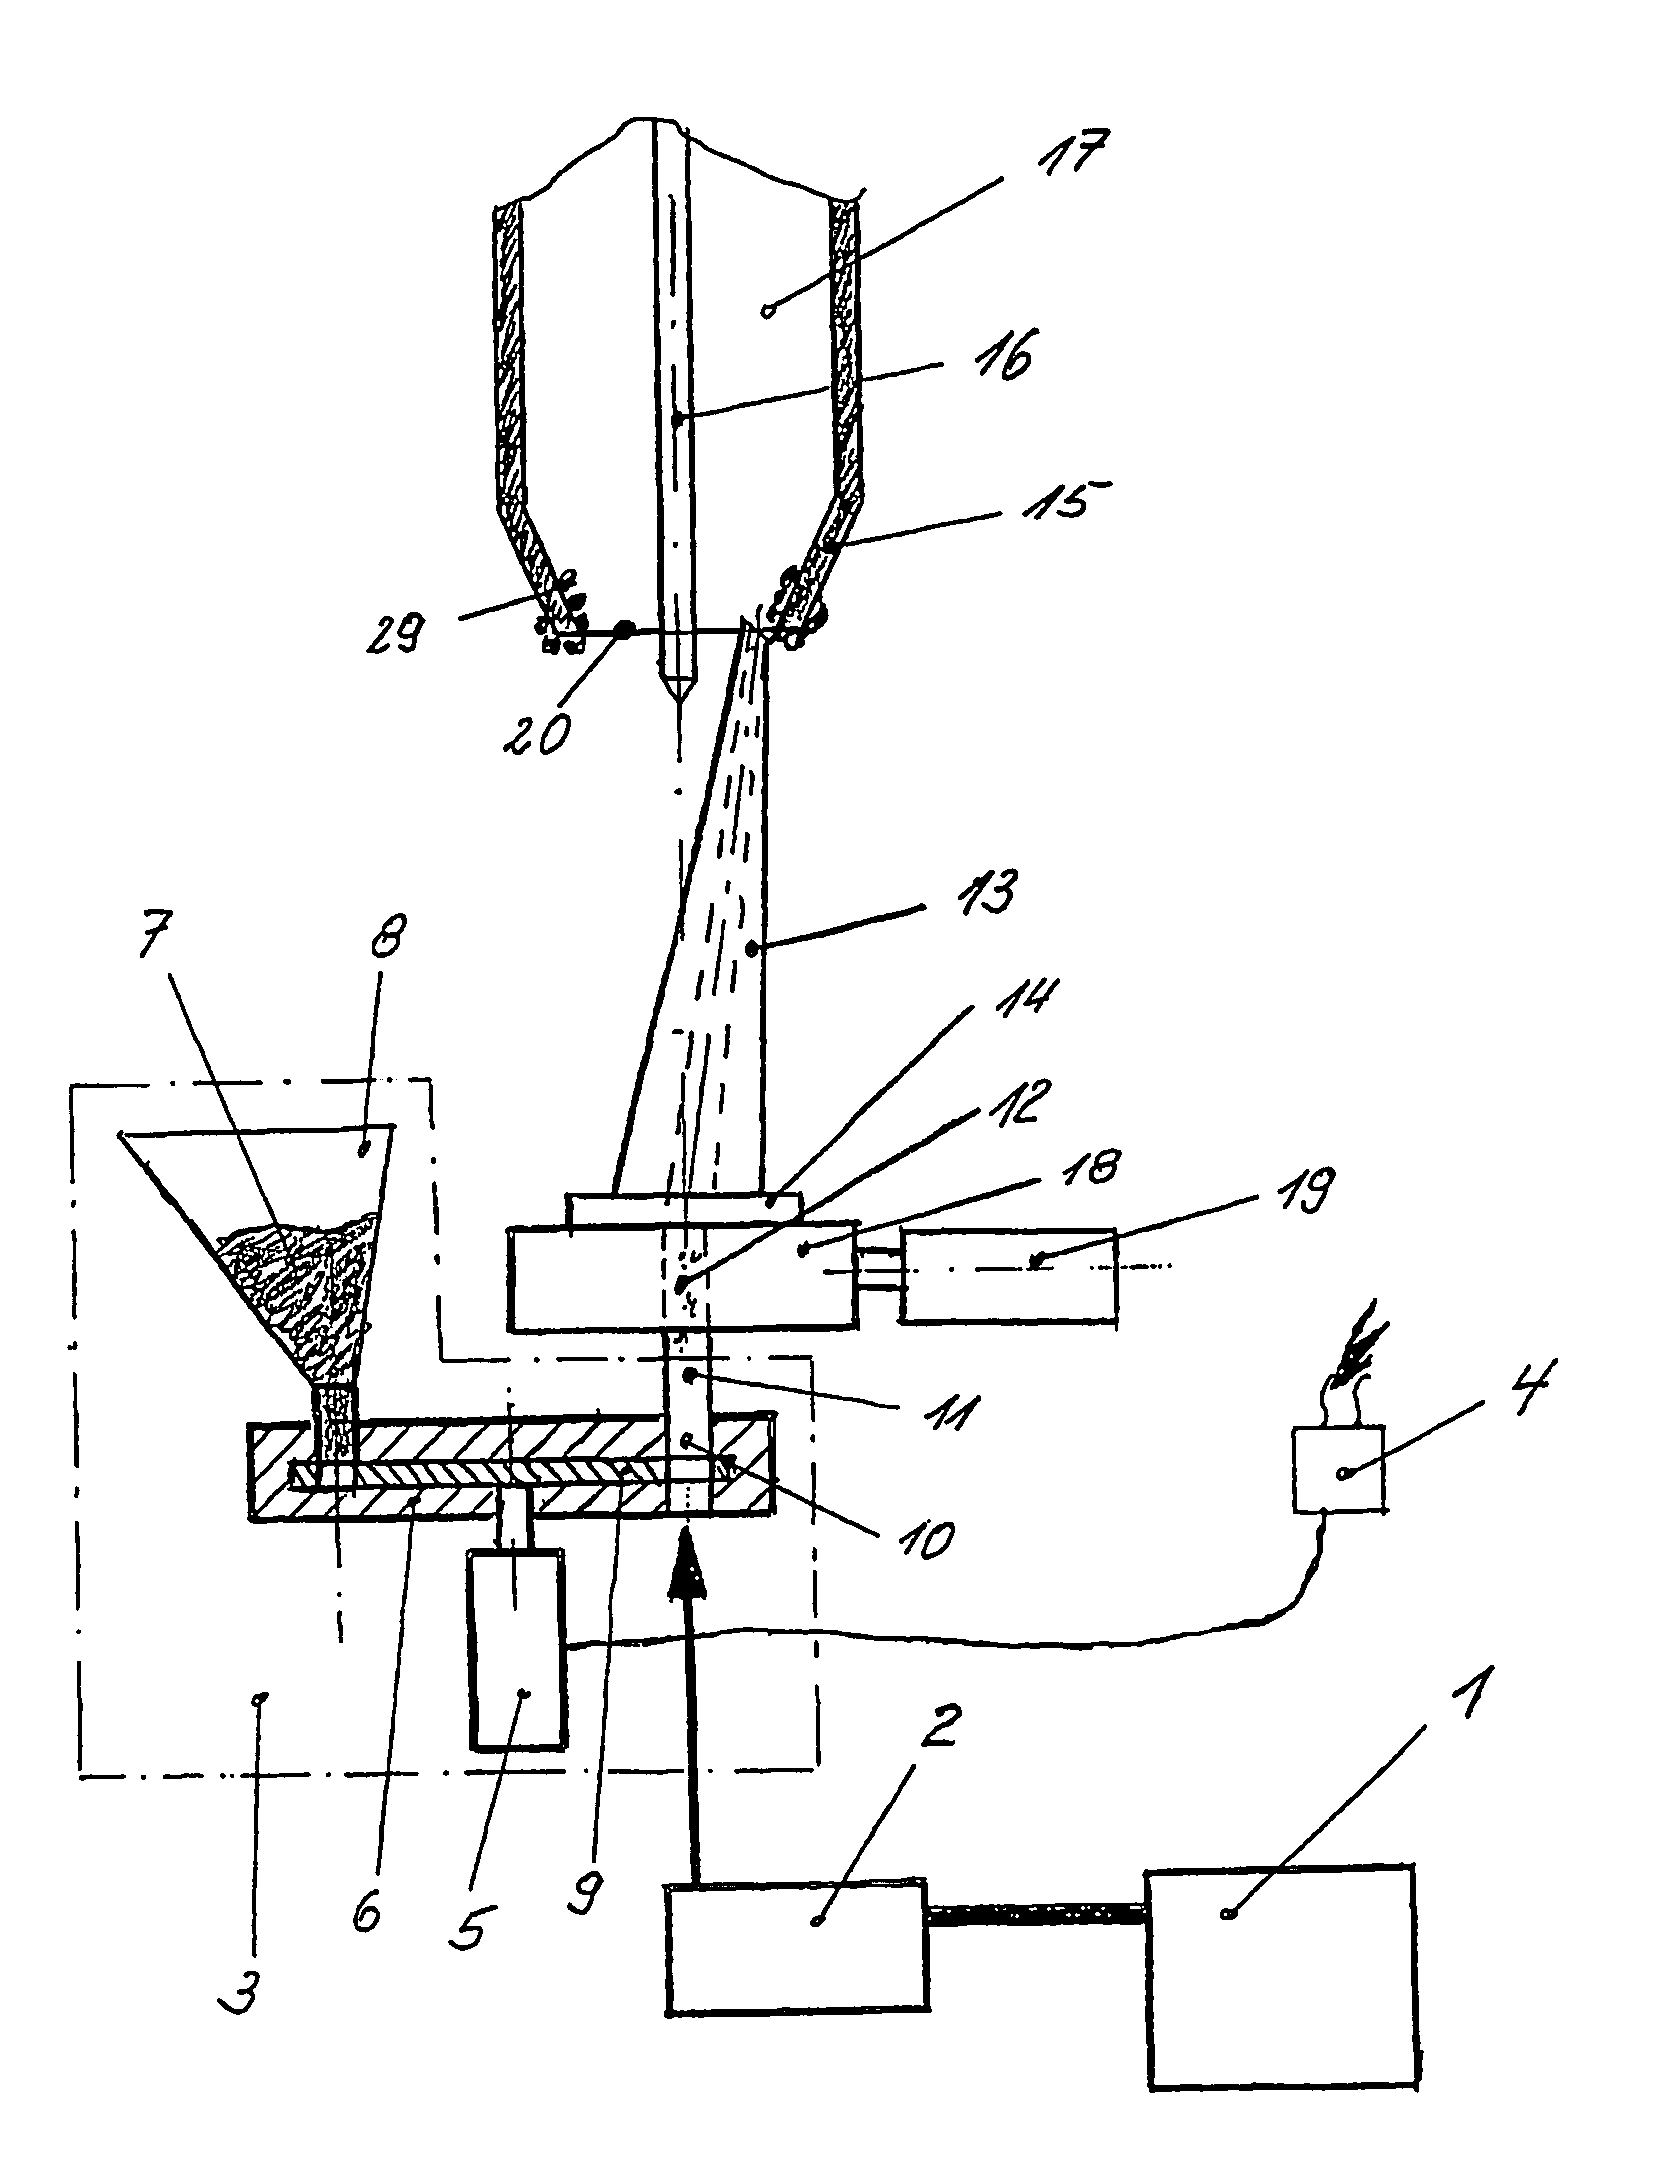 Method and device for cleaning welding torches